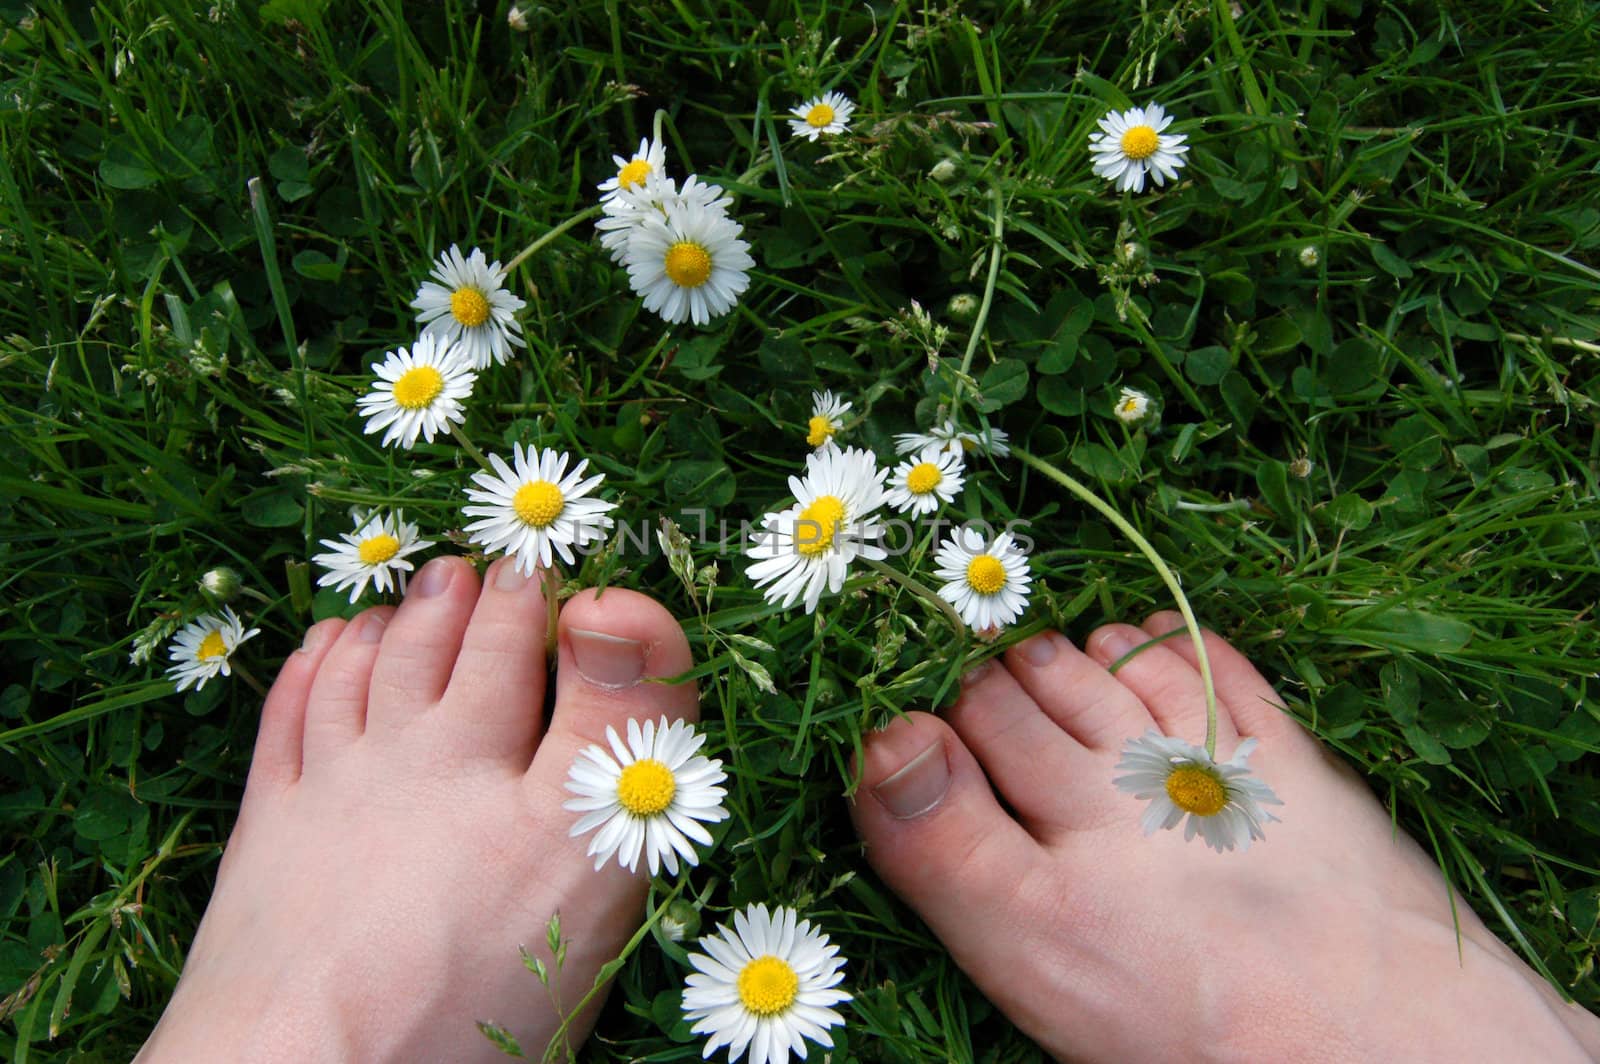 Barefoot with daisies by sarahdoow